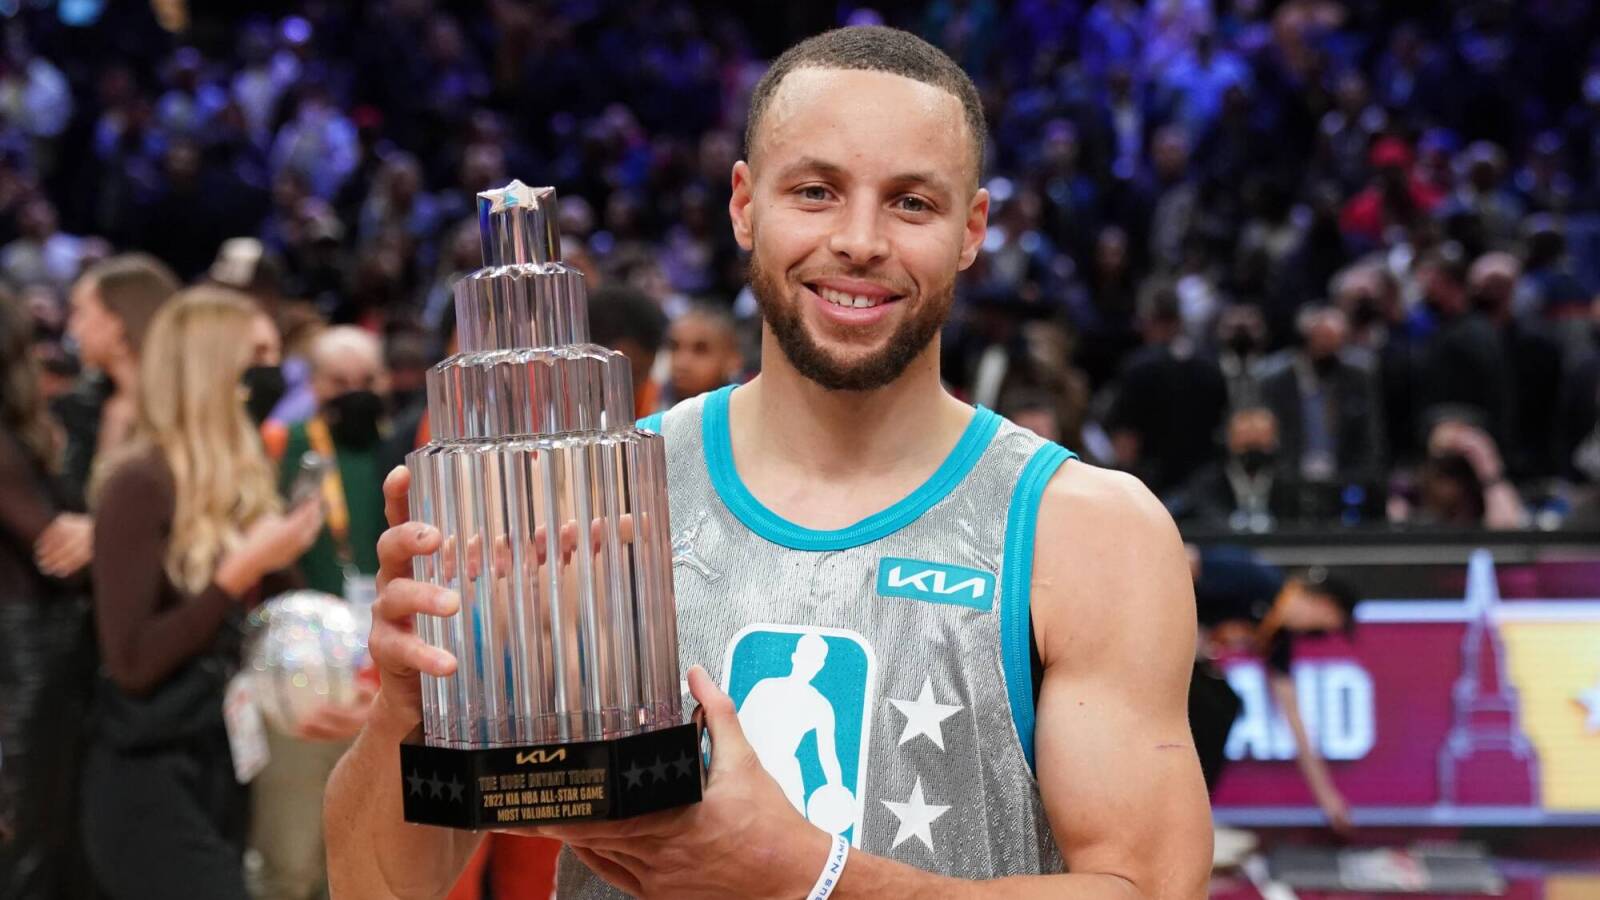 Stephen Curry wins All-Star MVP with record-setting shooting display.